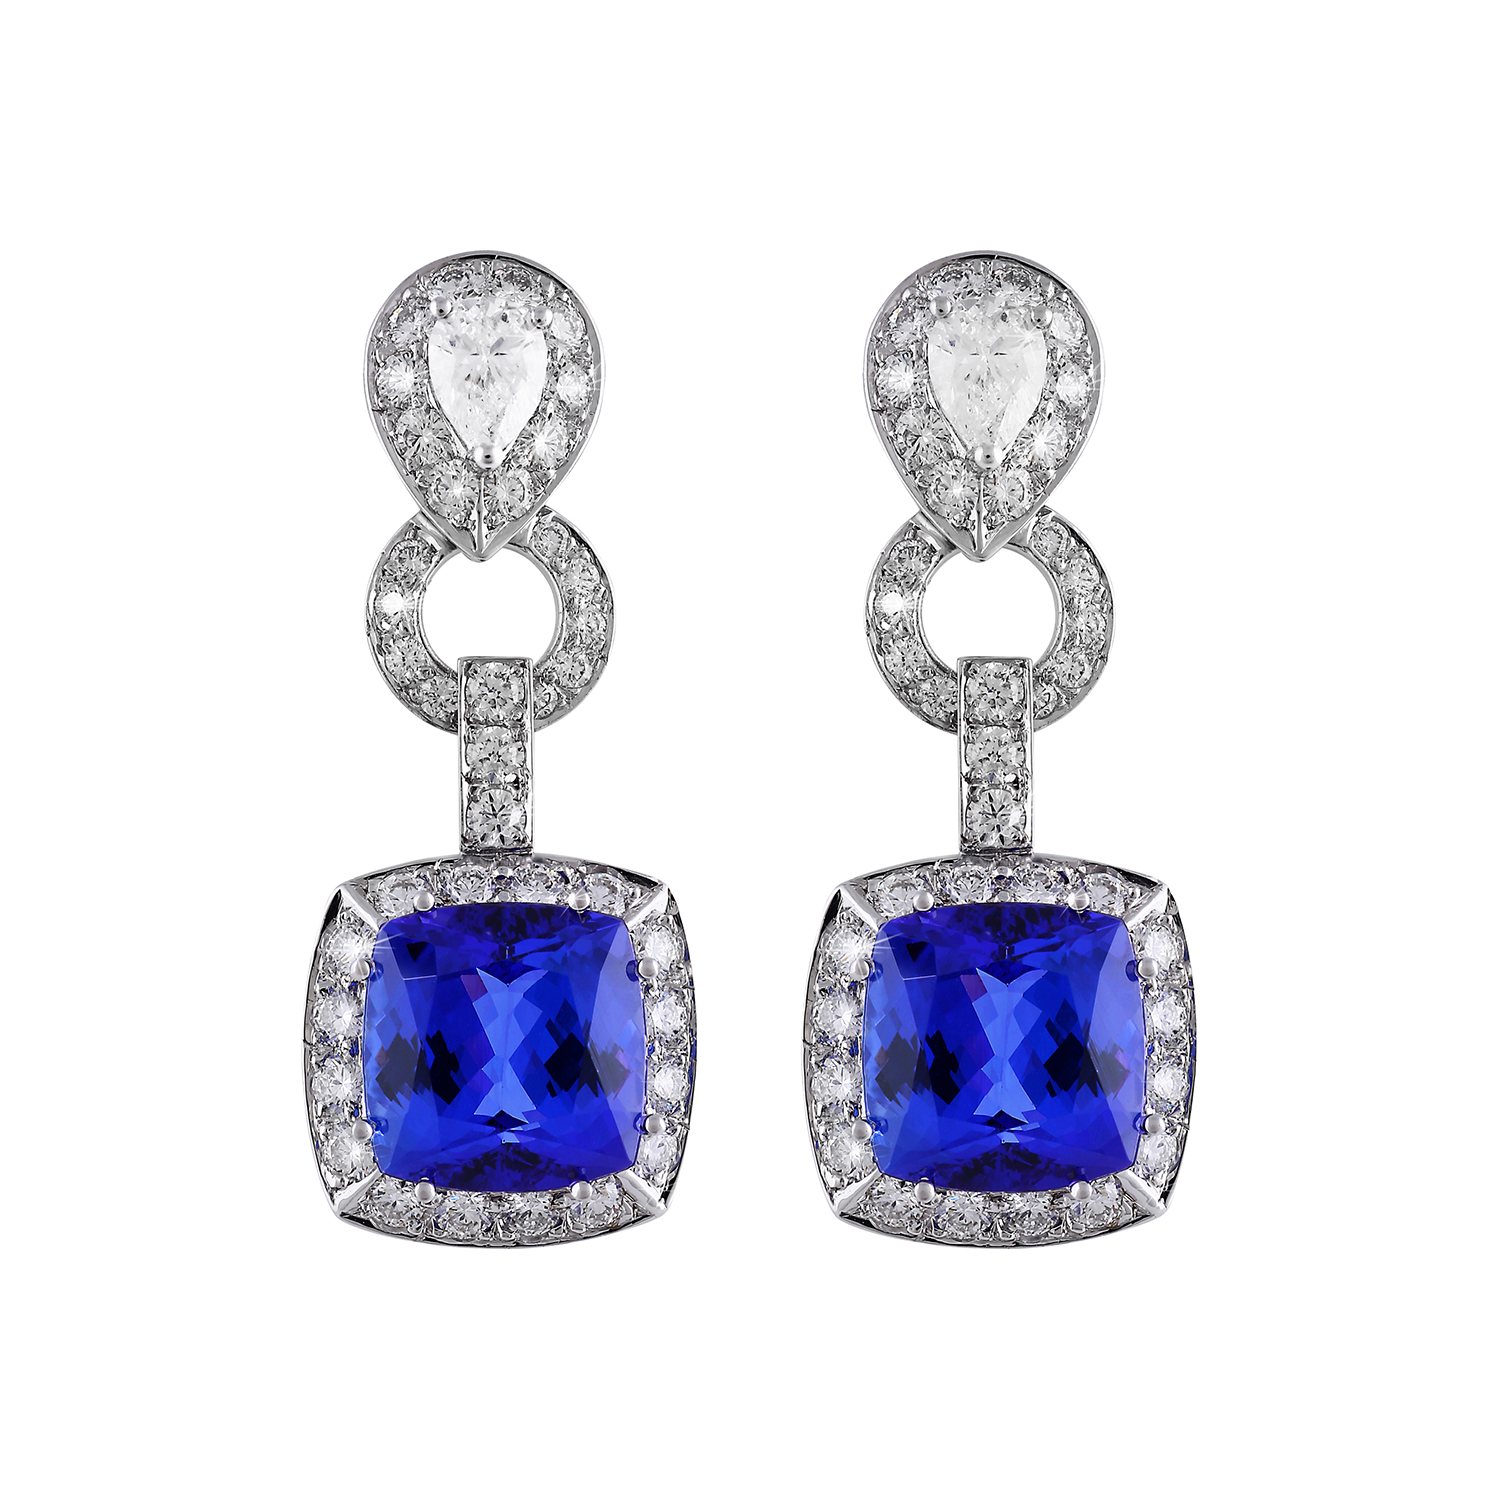 Exotic Gems » Product Categories » Earrings